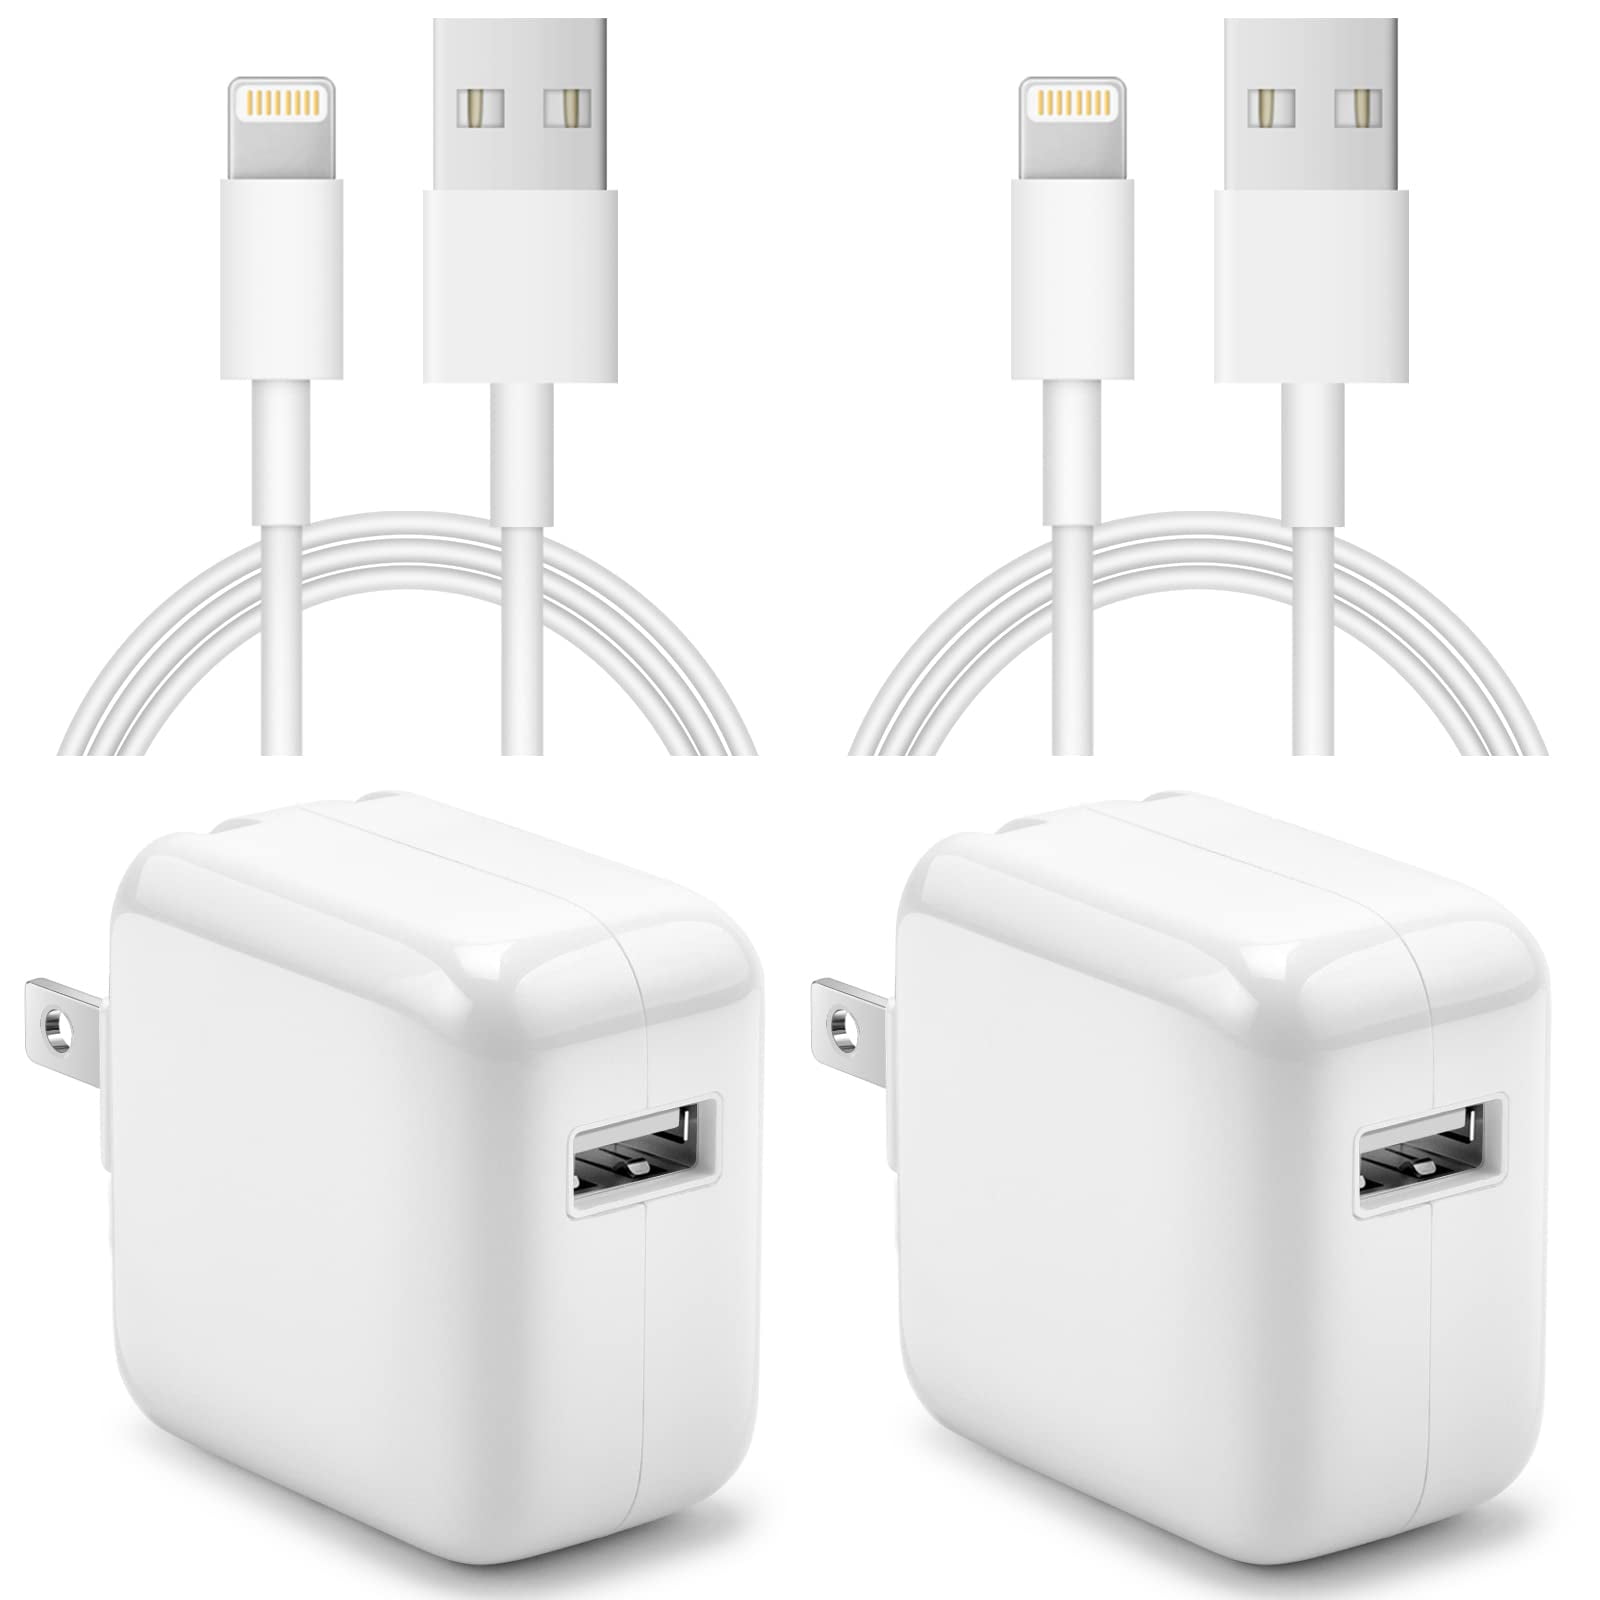 Honger Mannelijkheid Somber iPad Charger iPhone Charger【Apple MFi Certified】 [2-Pack] 12W USB Wall  Charger Foldable Travel Plug Block with 6FT USB to Lightning Cable  Compatible with iPad iPhone, iPad, Airpod - Walmart.com